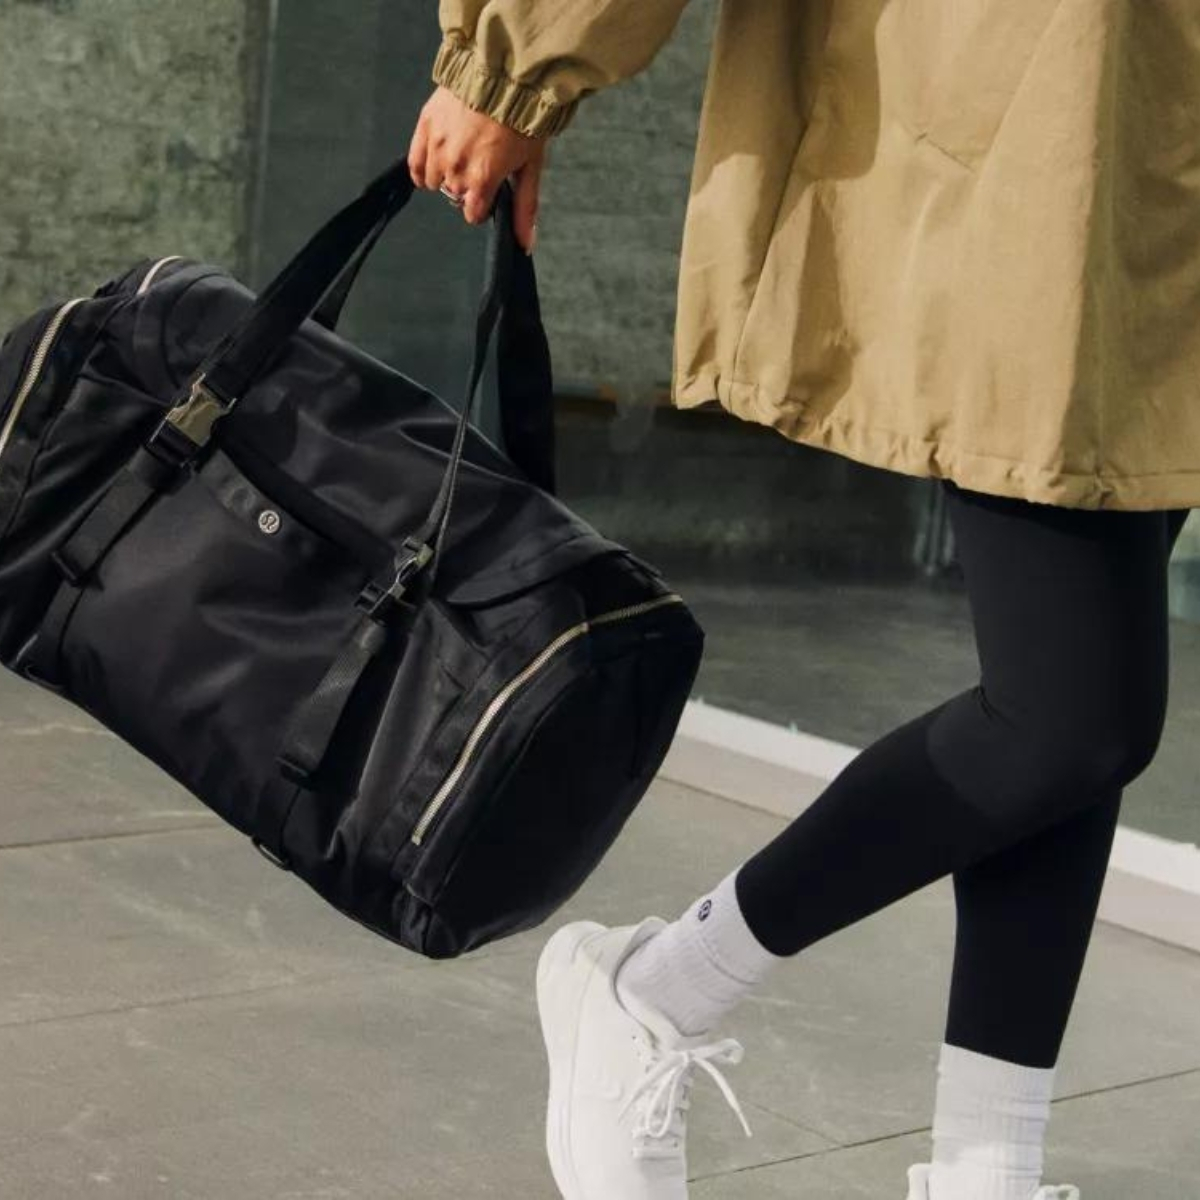 Jet off in Comfy Style With Lululemon's New Travel Capsule Collection